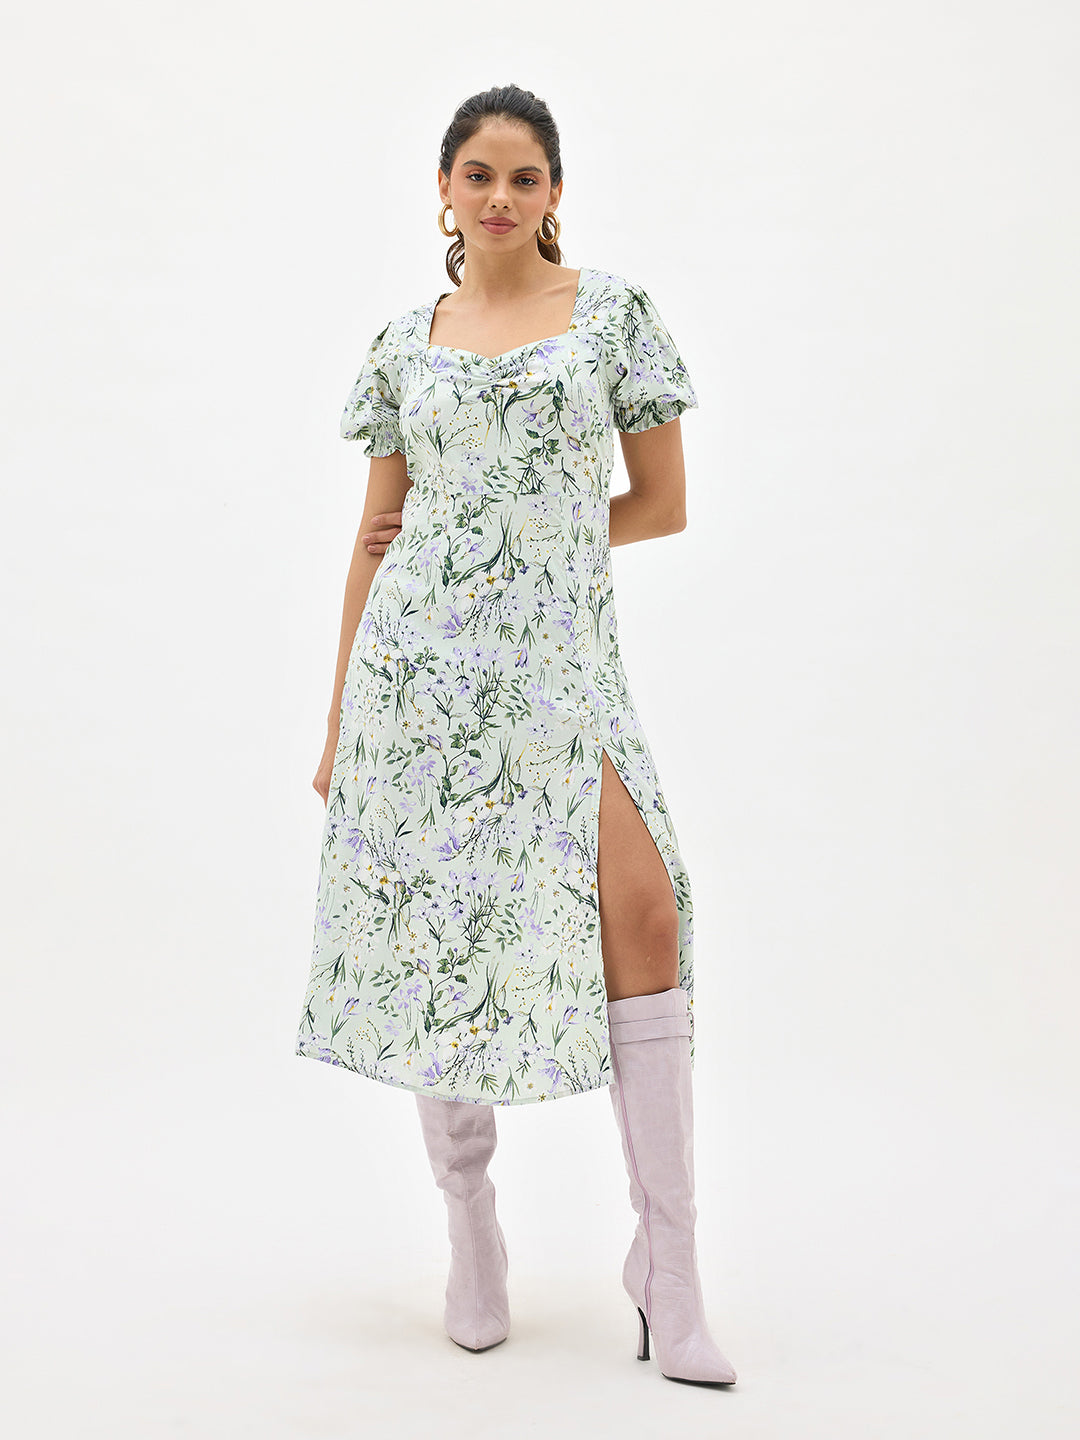 Ayaat|Dreamy viscose floral dress with sweetheart neck